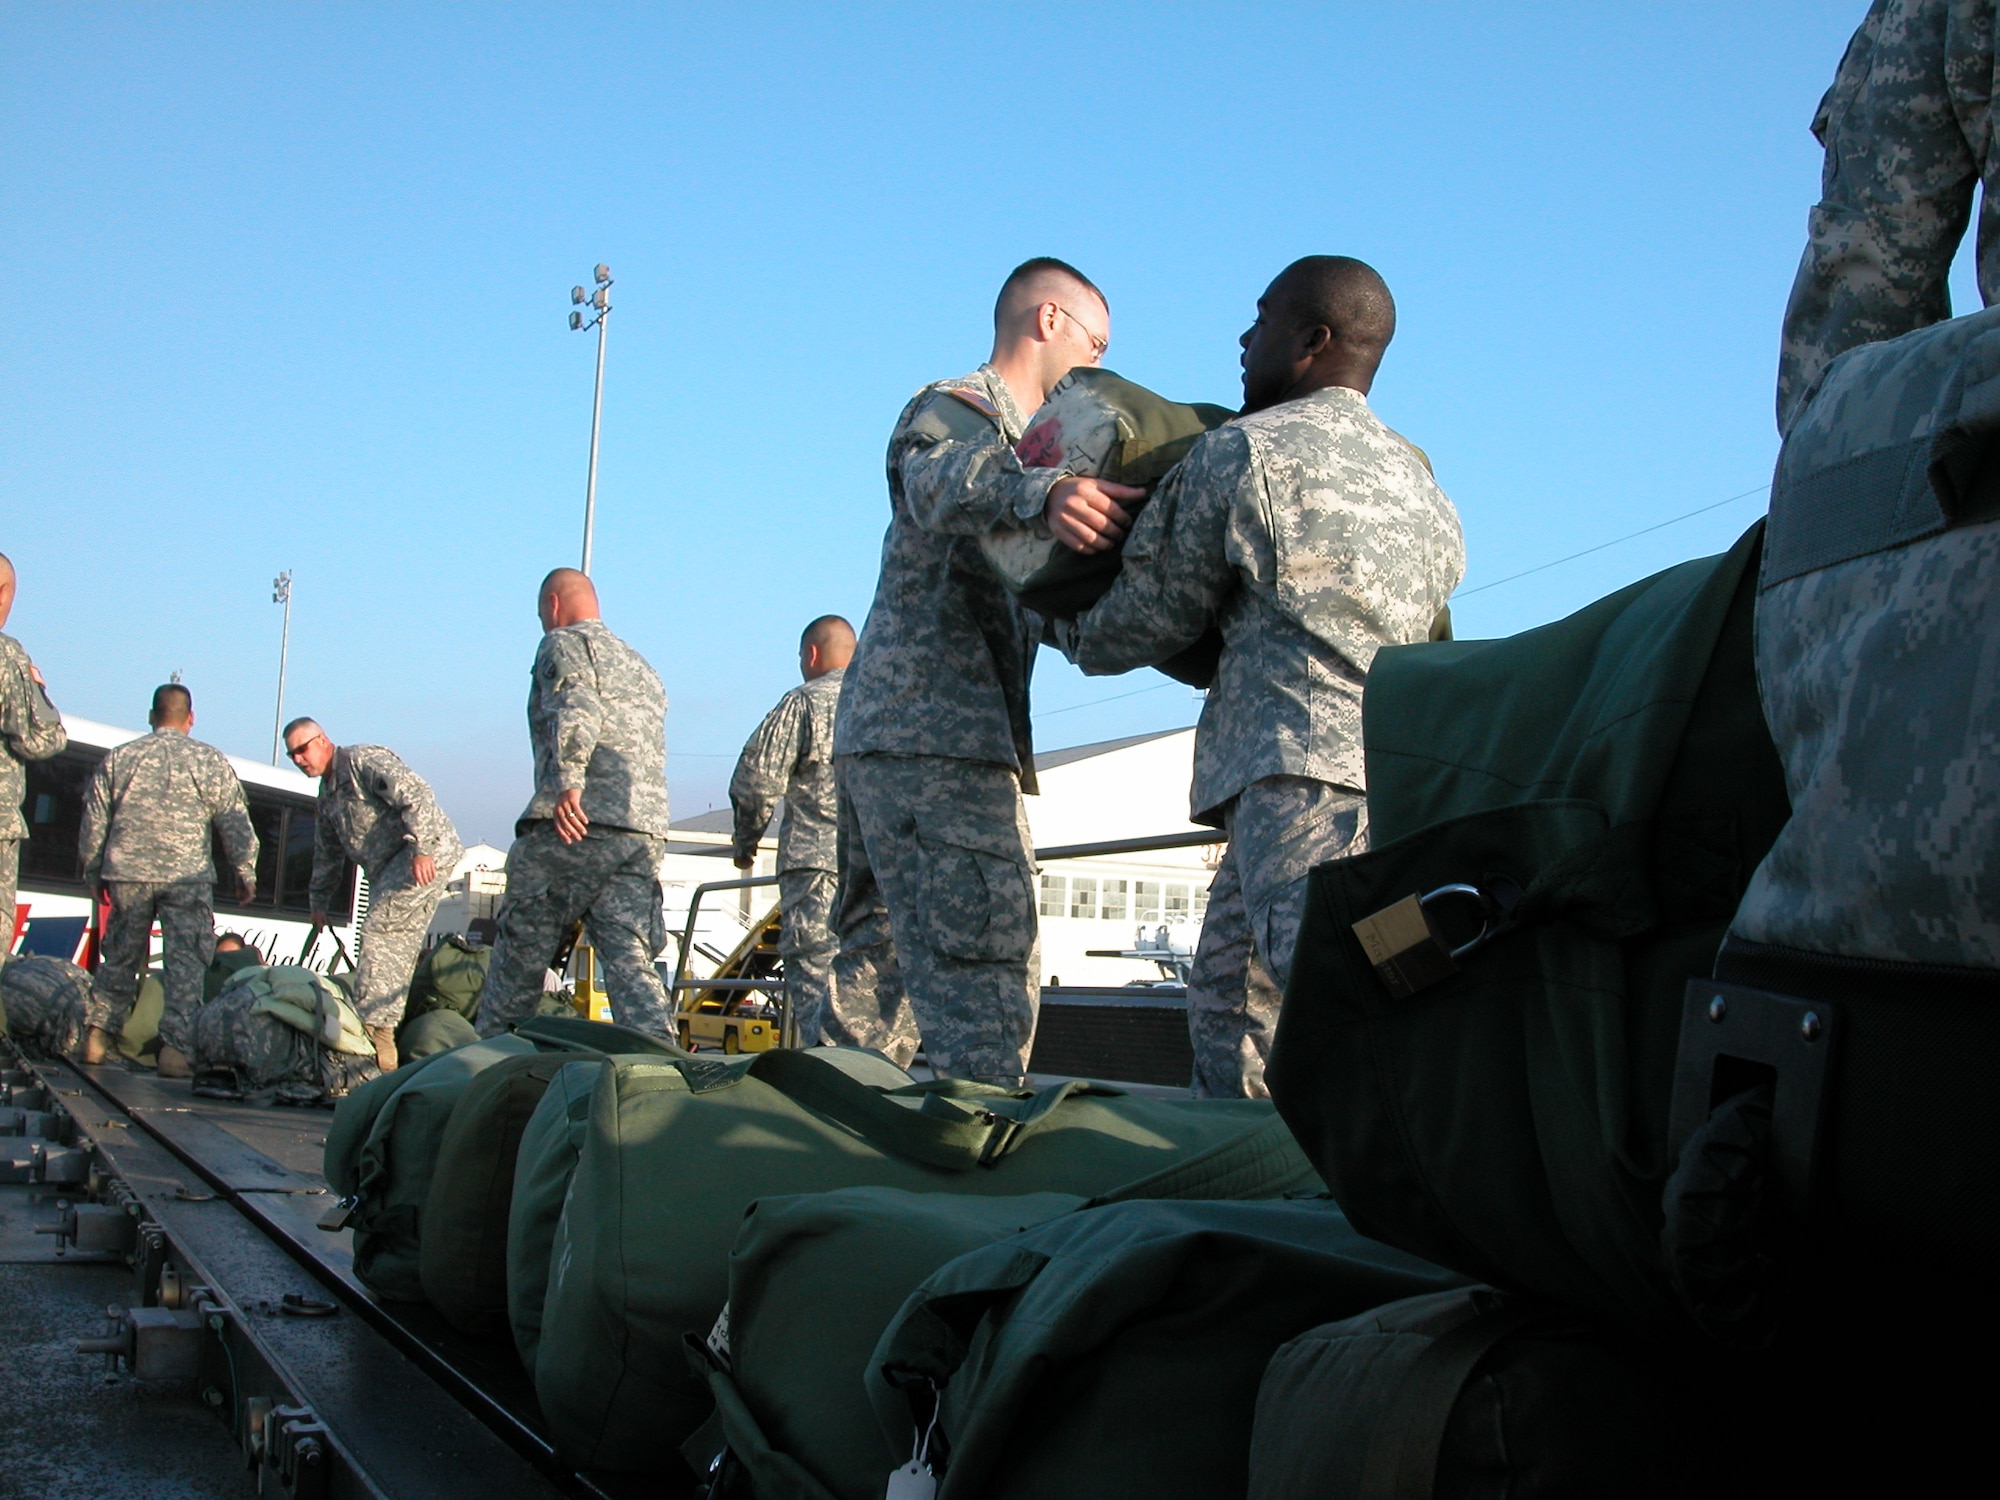 Members of the Army National Guard’s 304th Sustainment Brigade load equipment on a K-loader to prepare for their unit’s deployment to Iraq. In all, they loaded about 36,500 pounds of cargo and personal equipment. After leaving March ARB, they flew to Fort Bliss, Texas where they will train for six weeks before heading to Iraq. According to 452 APSF, 34,000 people (approximately 22 million pounds) and about 56 million pounds of cargo are processed from March ARB each year. (U.S. Air Force photo by Staff. Sgt. Joe Davidson)